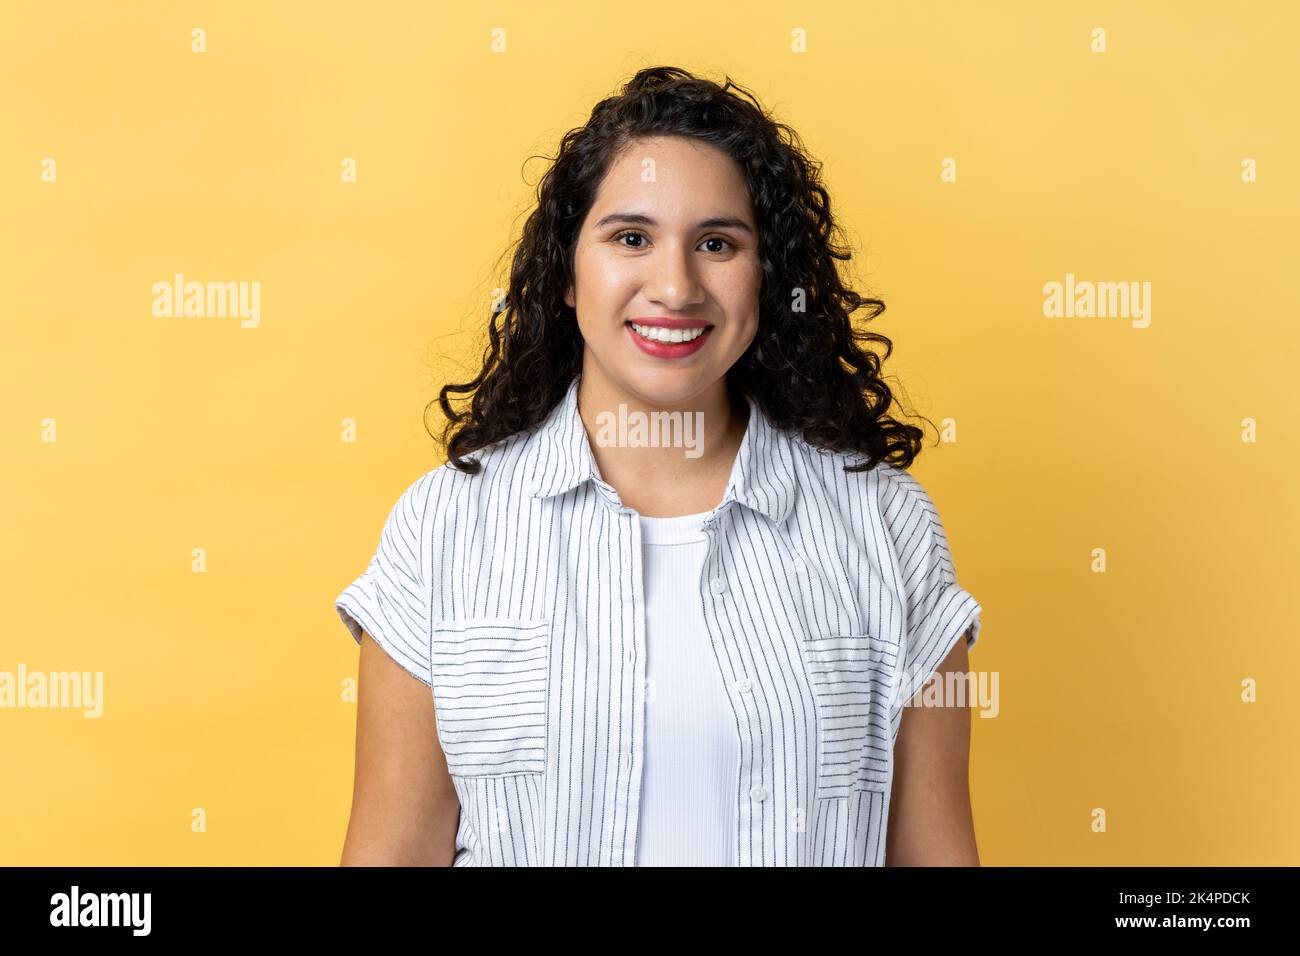 Portrait of cheerful positive woman with dark wavy hair looking at camera with toothy smile, expressing happiness, being in good mood. Indoor studio shot isolated on yellow background. Stock Photo